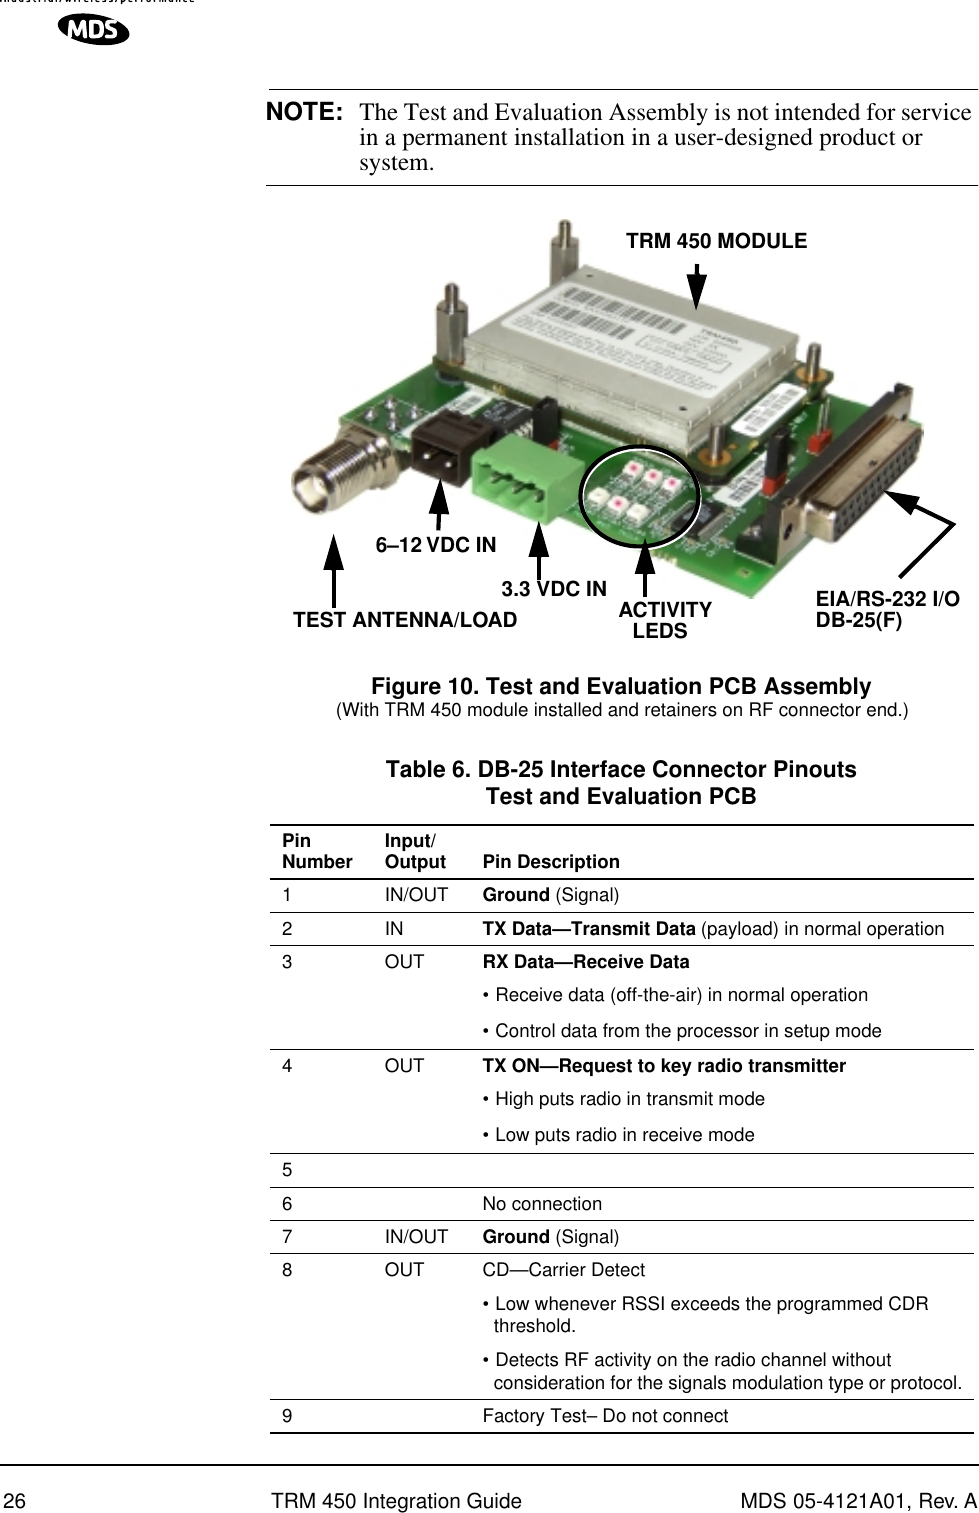 26 TRM 450 Integration Guide MDS 05-4121A01, Rev. ANOTE: The Test and Evaluation Assembly is not intended for service in a permanent installation in a user-designed product or system.Invisible place holderFigure 10. Test and Evaluation PCB Assembly(With TRM 450 module installed and retainers on RF connector end.)3.3 VDC INTRM  450 MODULE6–12 VDC INEIA/RS-232 I/OTEST ANTENNA/LOAD DB-25(F)ACTIVITYLEDS Table 6. DB-25 Interface Connector PinoutsTest and Evaluation PCB   PinNumber Input/Output Pin Description 1 IN/OUT Ground  (Signal)2IN TX Data—Transmit Data  (payload) in normal operation3 OUT RX Data—Receive Data •   Receive data (off-the-air) in normal operation•   Control data from the processor in setup mode4 OUT TX ON—Request to key radio transmitter •   High puts radio in transmit mode•   Low puts radio in receive mode56 No connection7 IN/OUT Ground  (Signal)8 OUT CD—Carrier Detect•   Low whenever RSSI exceeds the programmed CDR threshold. •   Detects RF activity on the radio channel without consideration for the signals modulation type or protocol.9 Factory Test– Do not connect